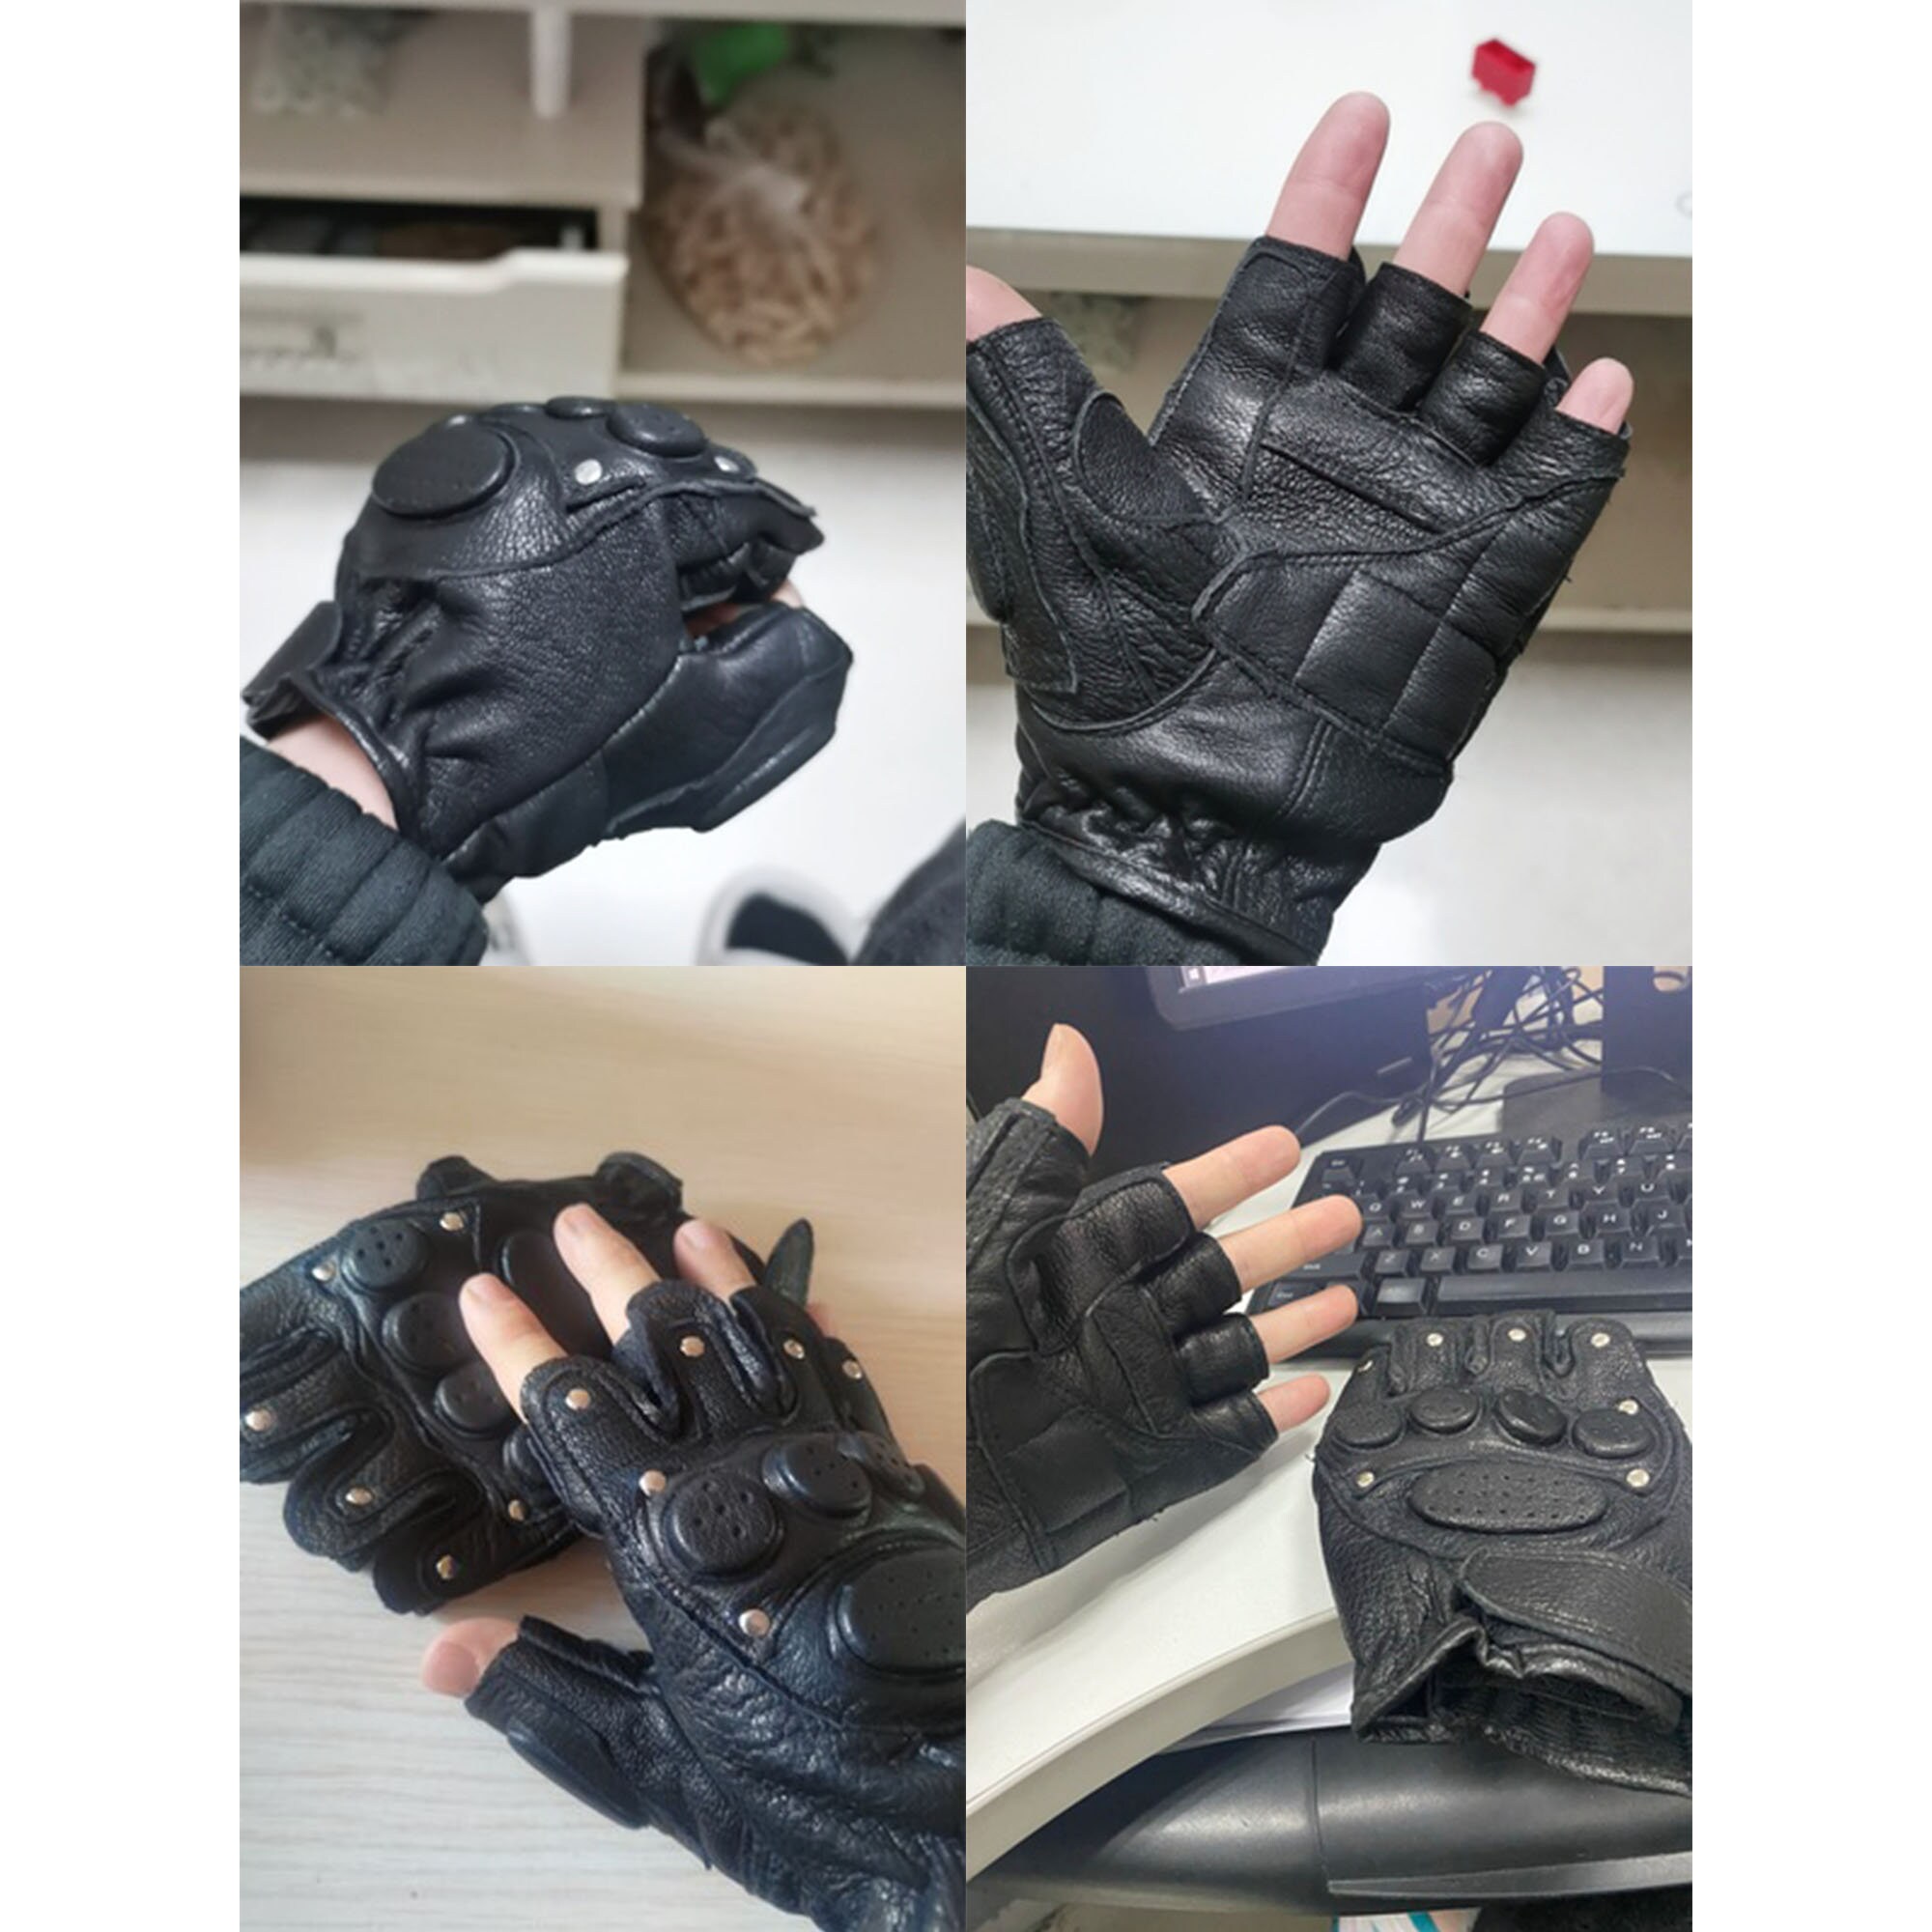 Sheepskin Half-finger Gloves for Men,cycling Driving Climbing Gloves,  Motorcycle Tactical Gloves,cyberpunk Goth Punk Ninja Leather Gloves 